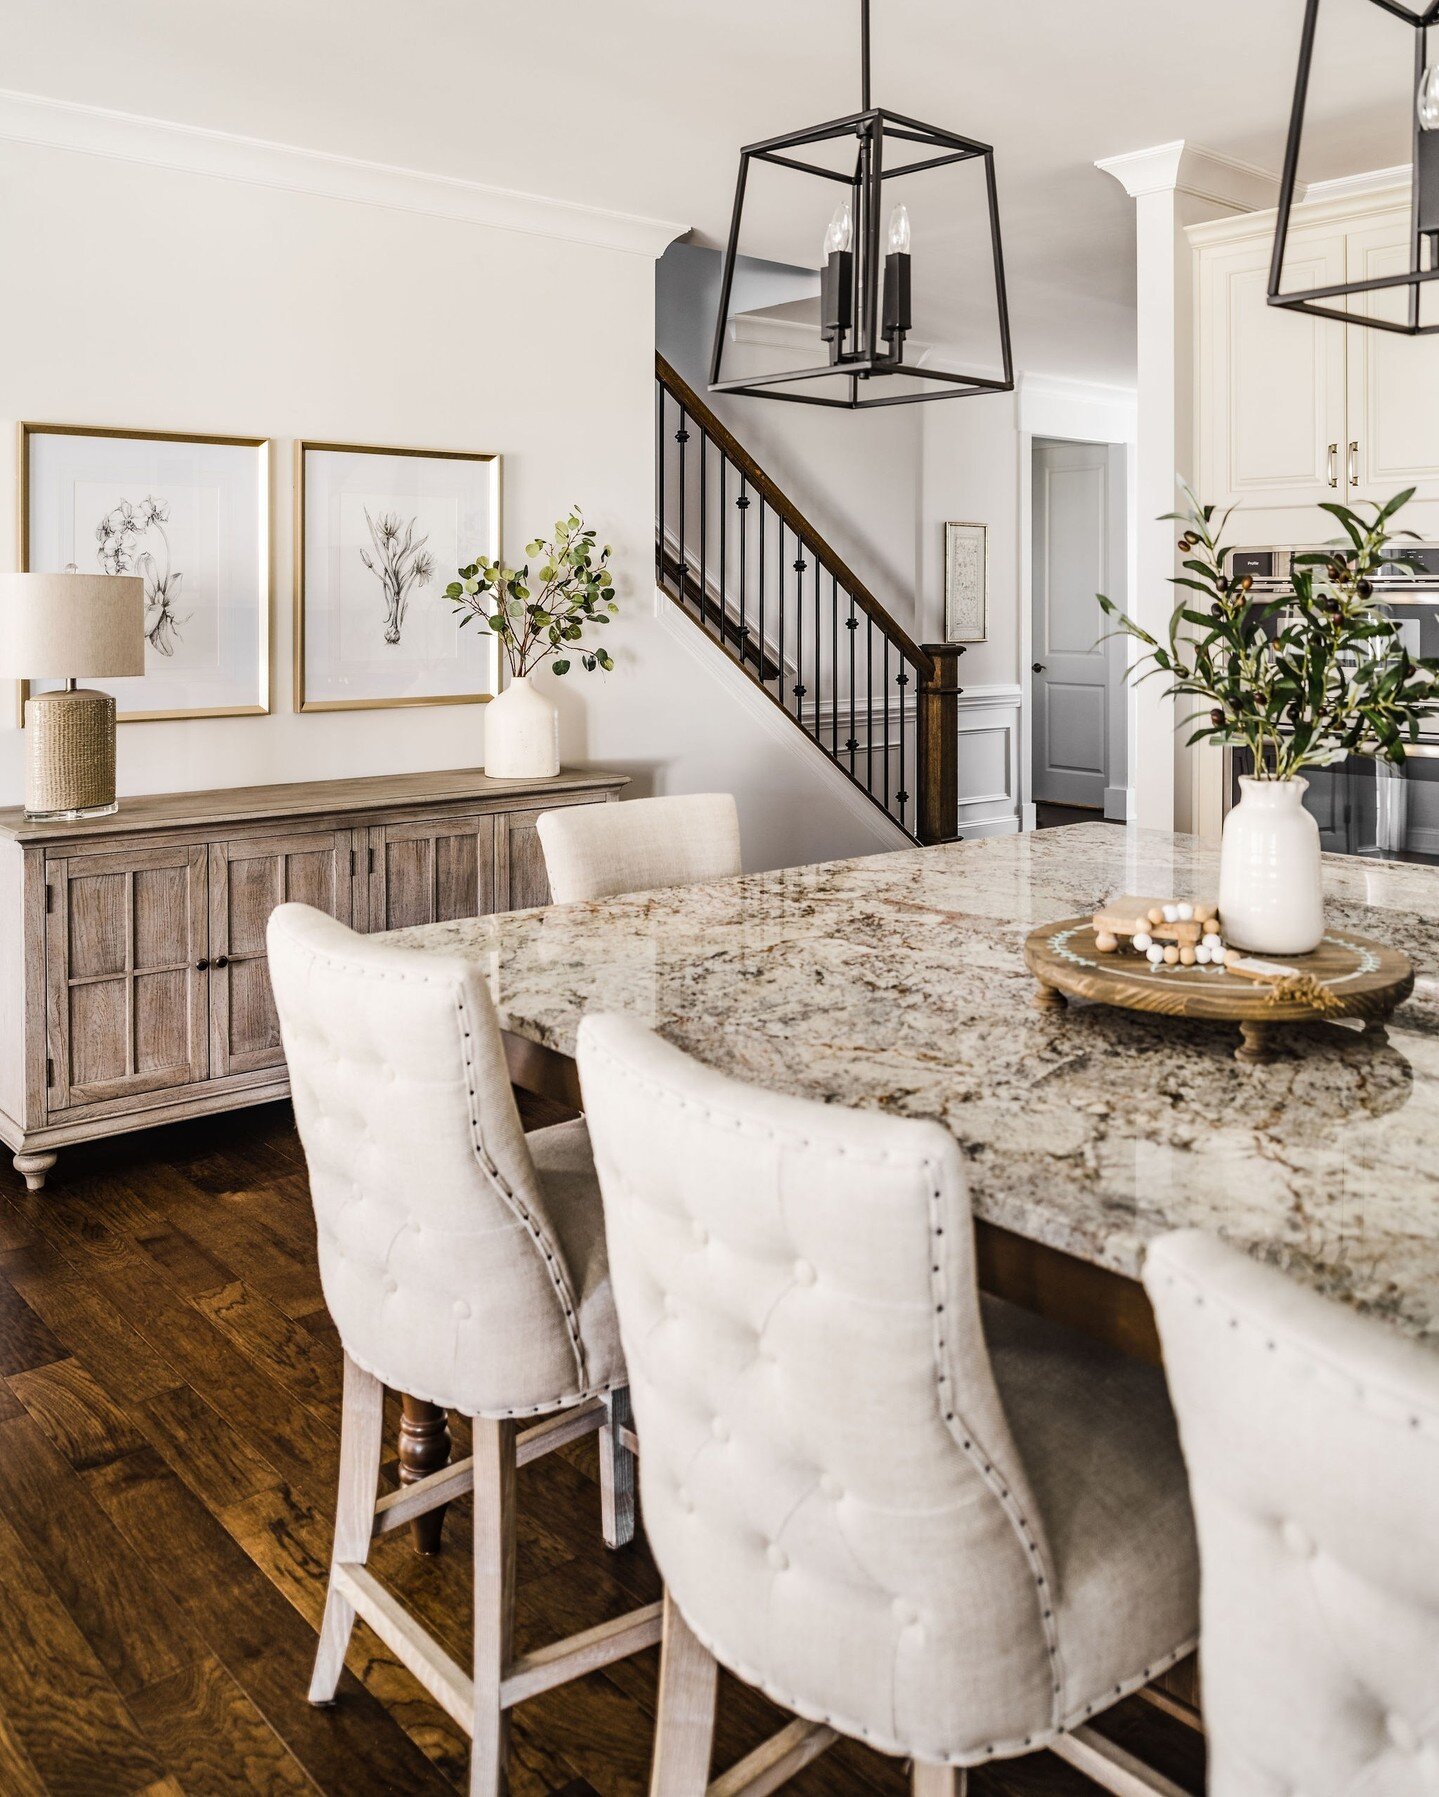 A new take on tradition...

As lifestyles have changed, so has the approach to optimal home design.

This fresh approach to a family dining space reflects a level of sophistication without being stuffy.

Interior Design: @saralynnbrennan
Photo: @tiff